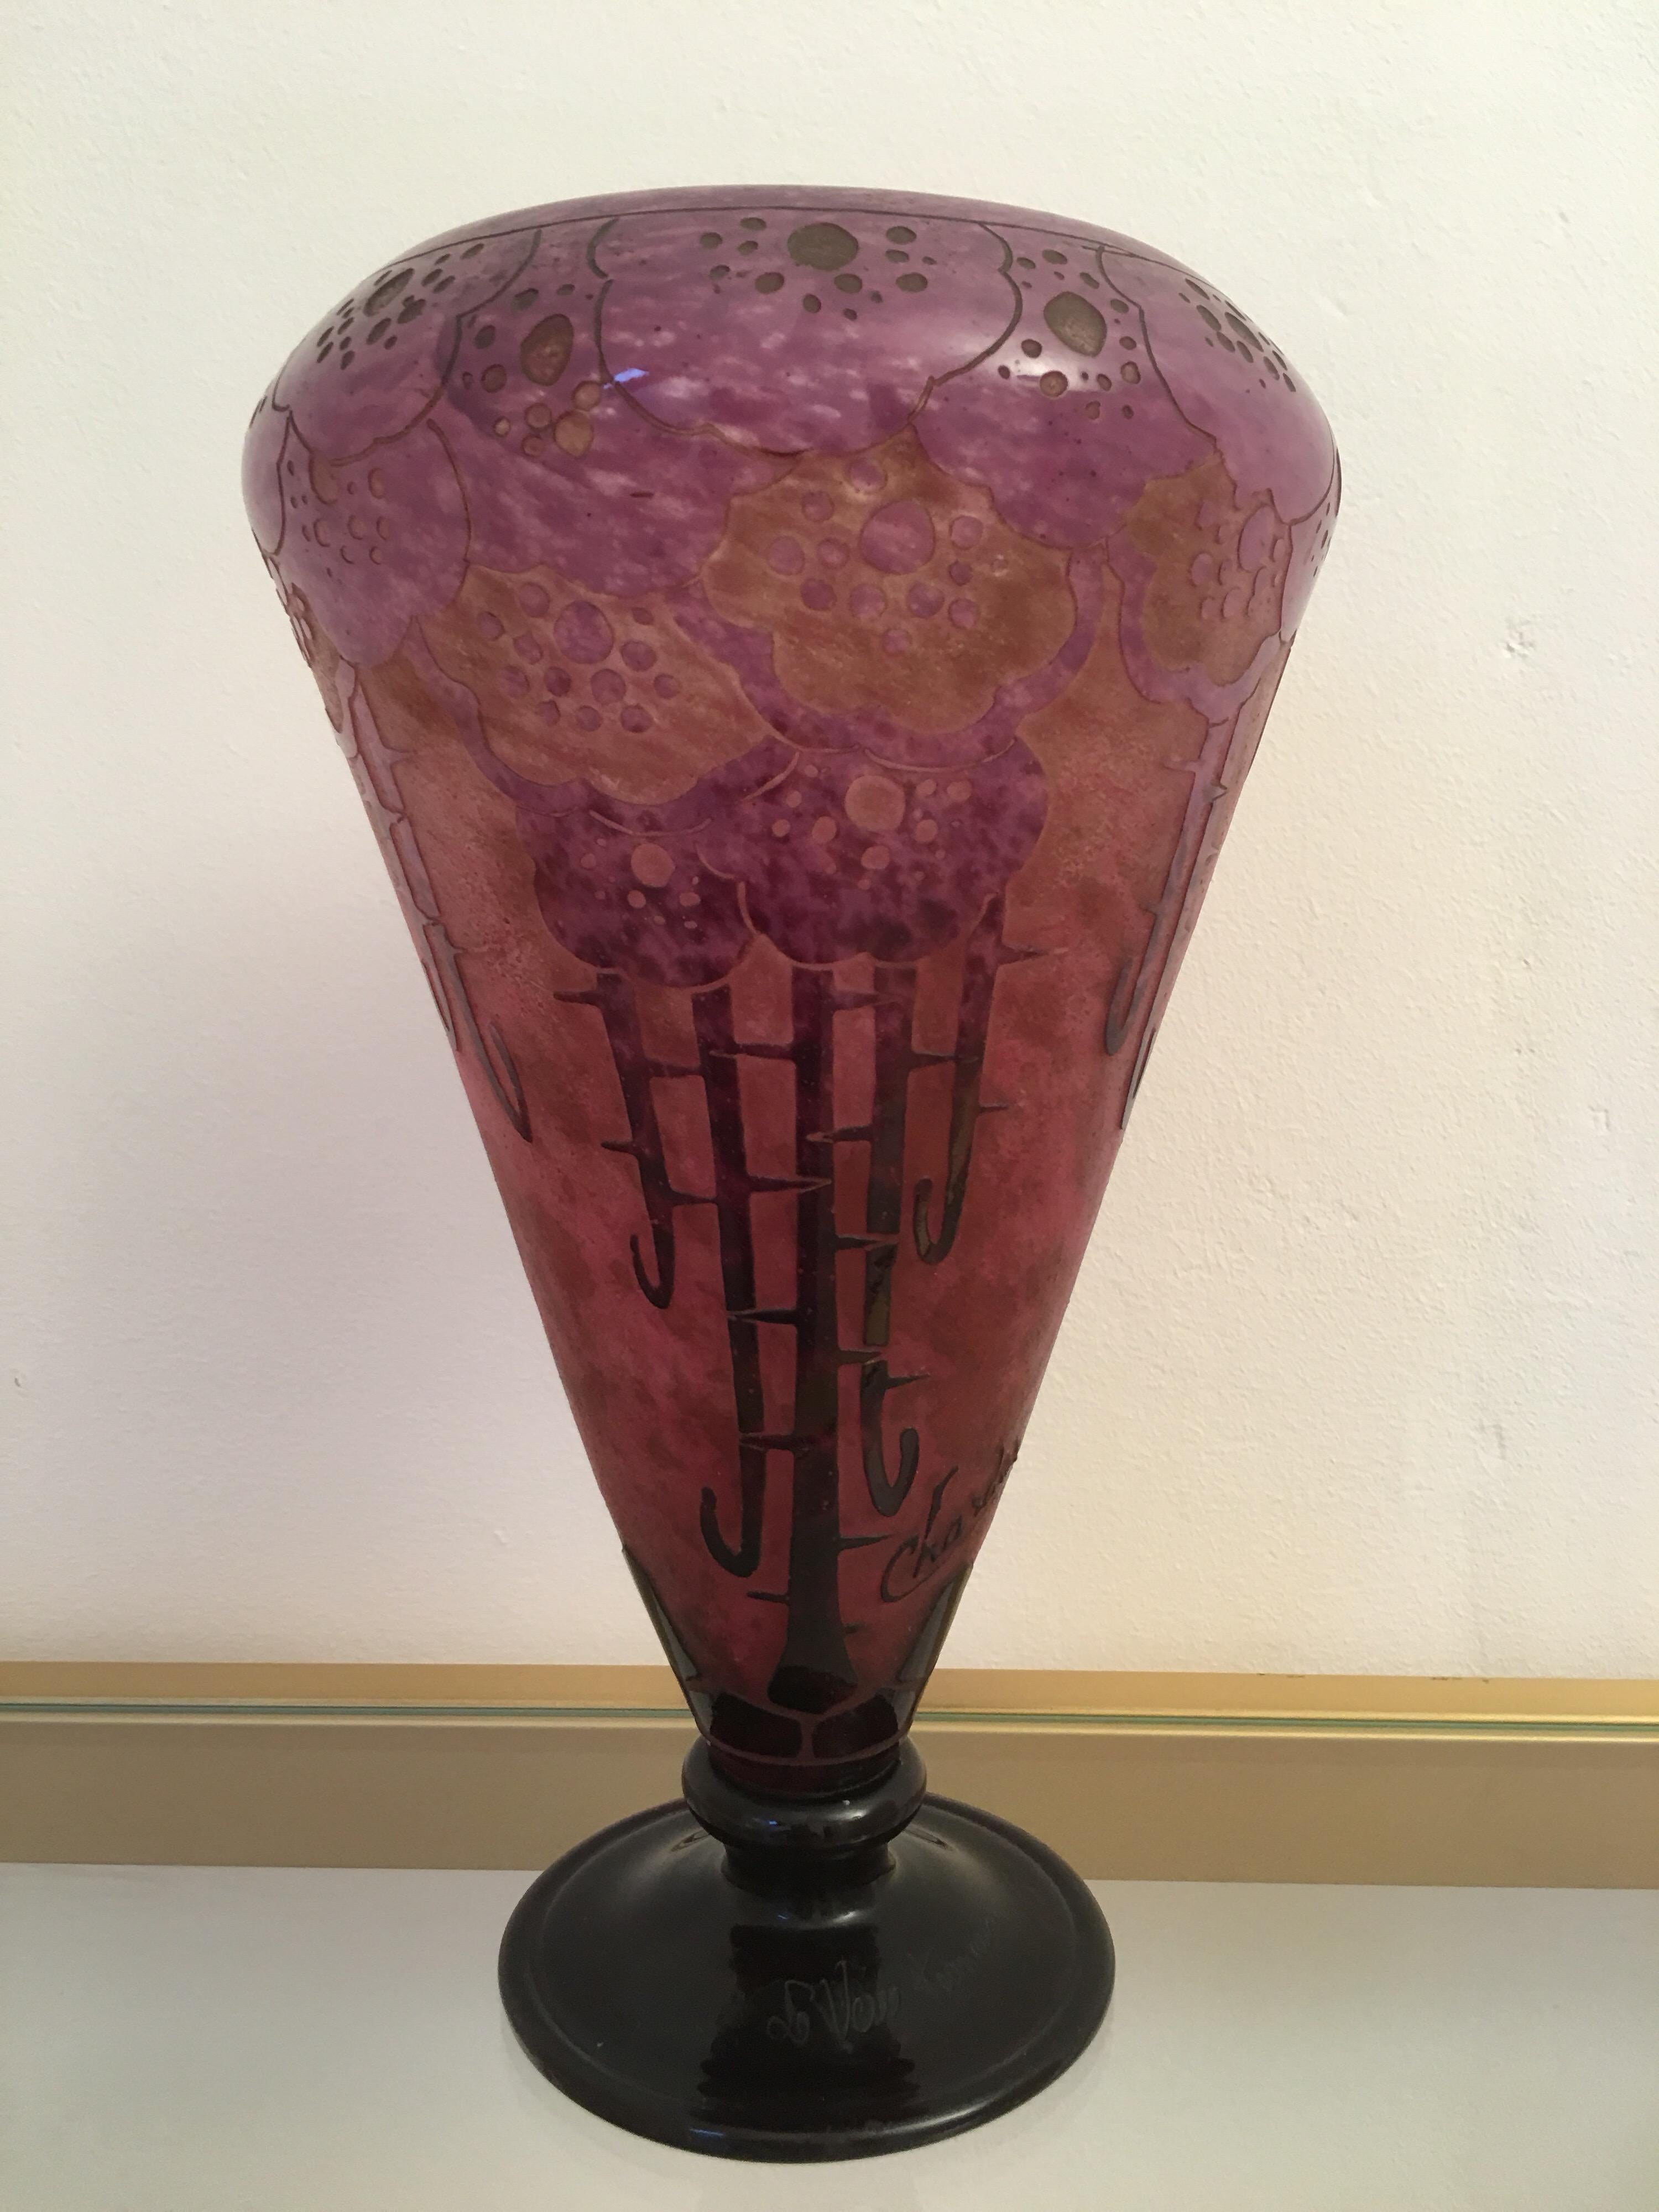 Discounted price until February only
Beautiful Art Deco vase by Charles Schneider, Le Verre Francais and Charder signed, circa 1925
Purple colored glass with stylized flower decor, acid clear.
In very good condition, very minor traces of use on the